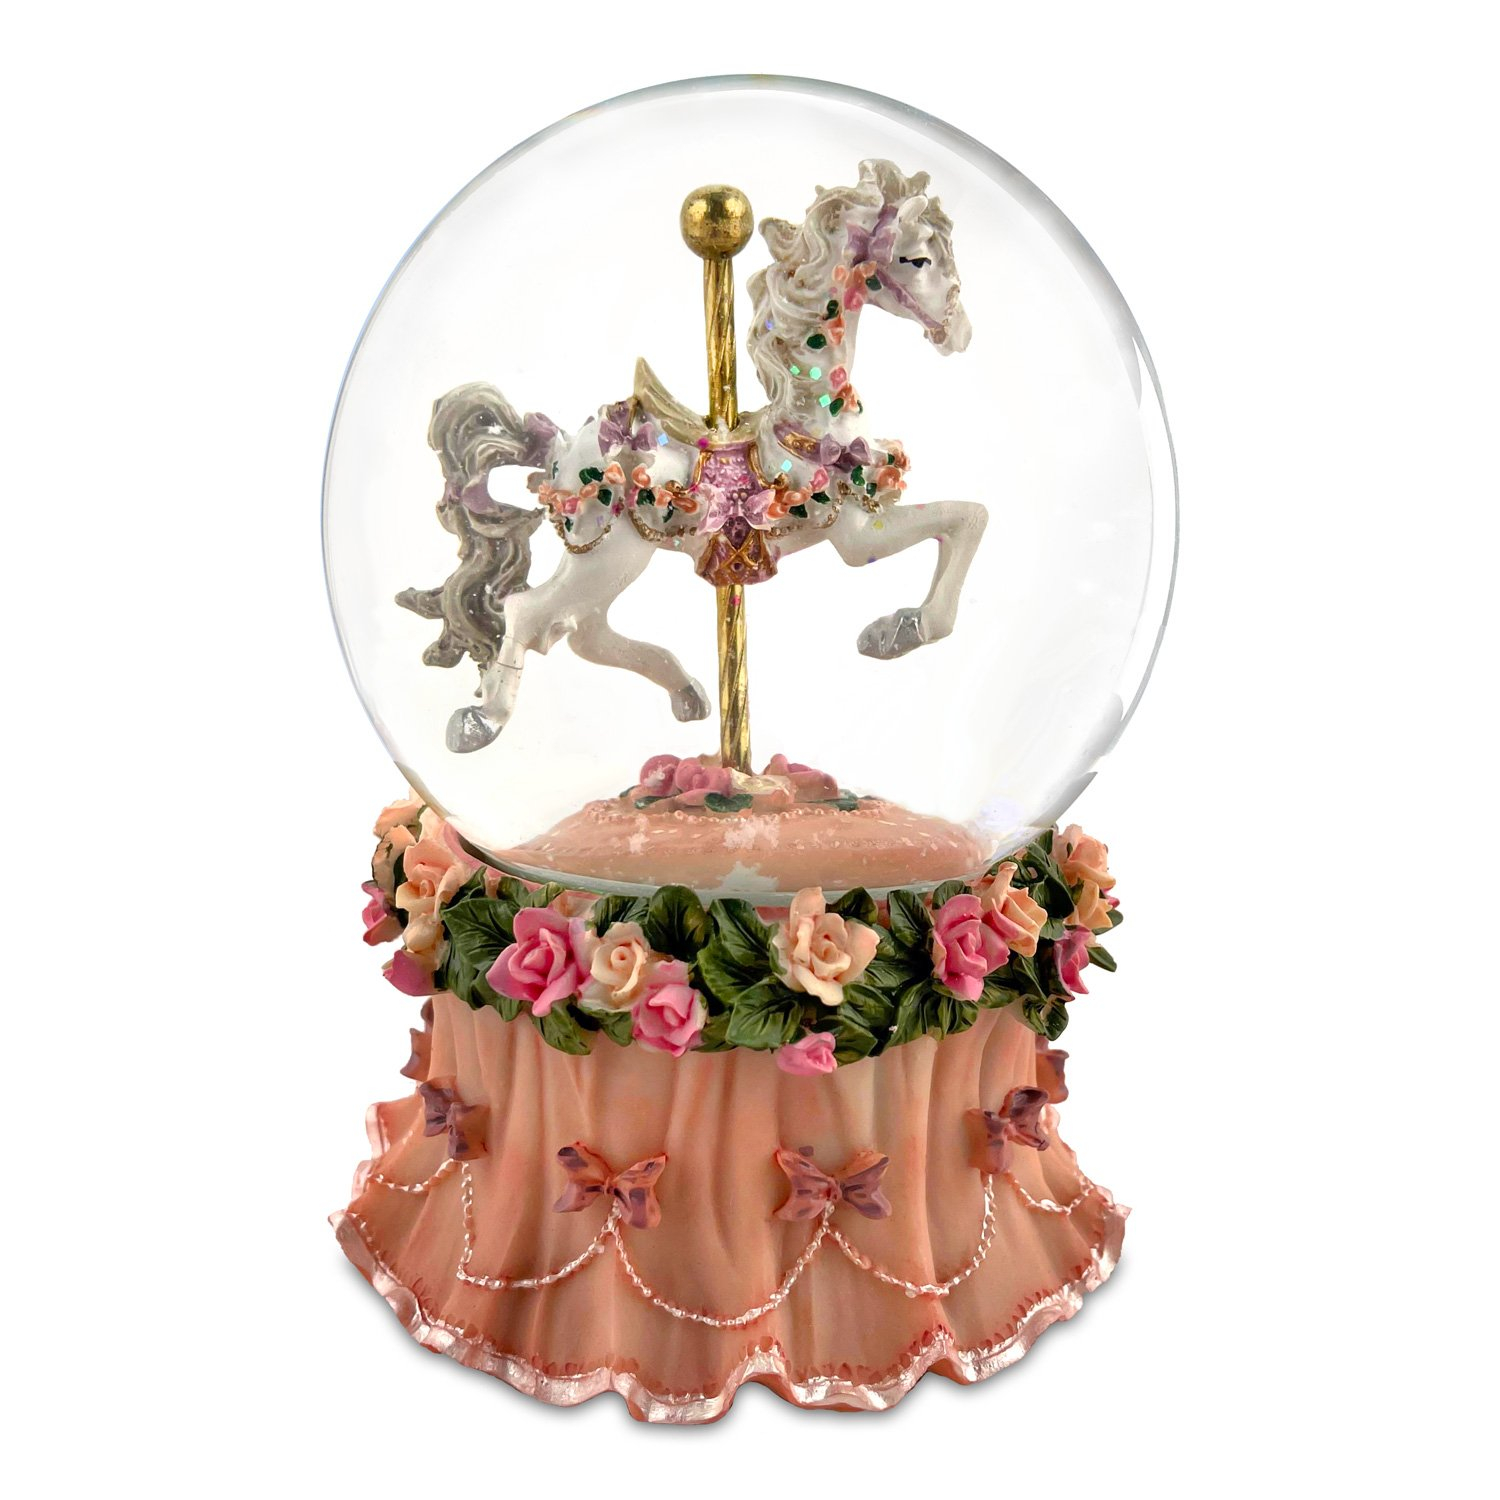 Carousel Horse Water Globe with Pink Flower Base